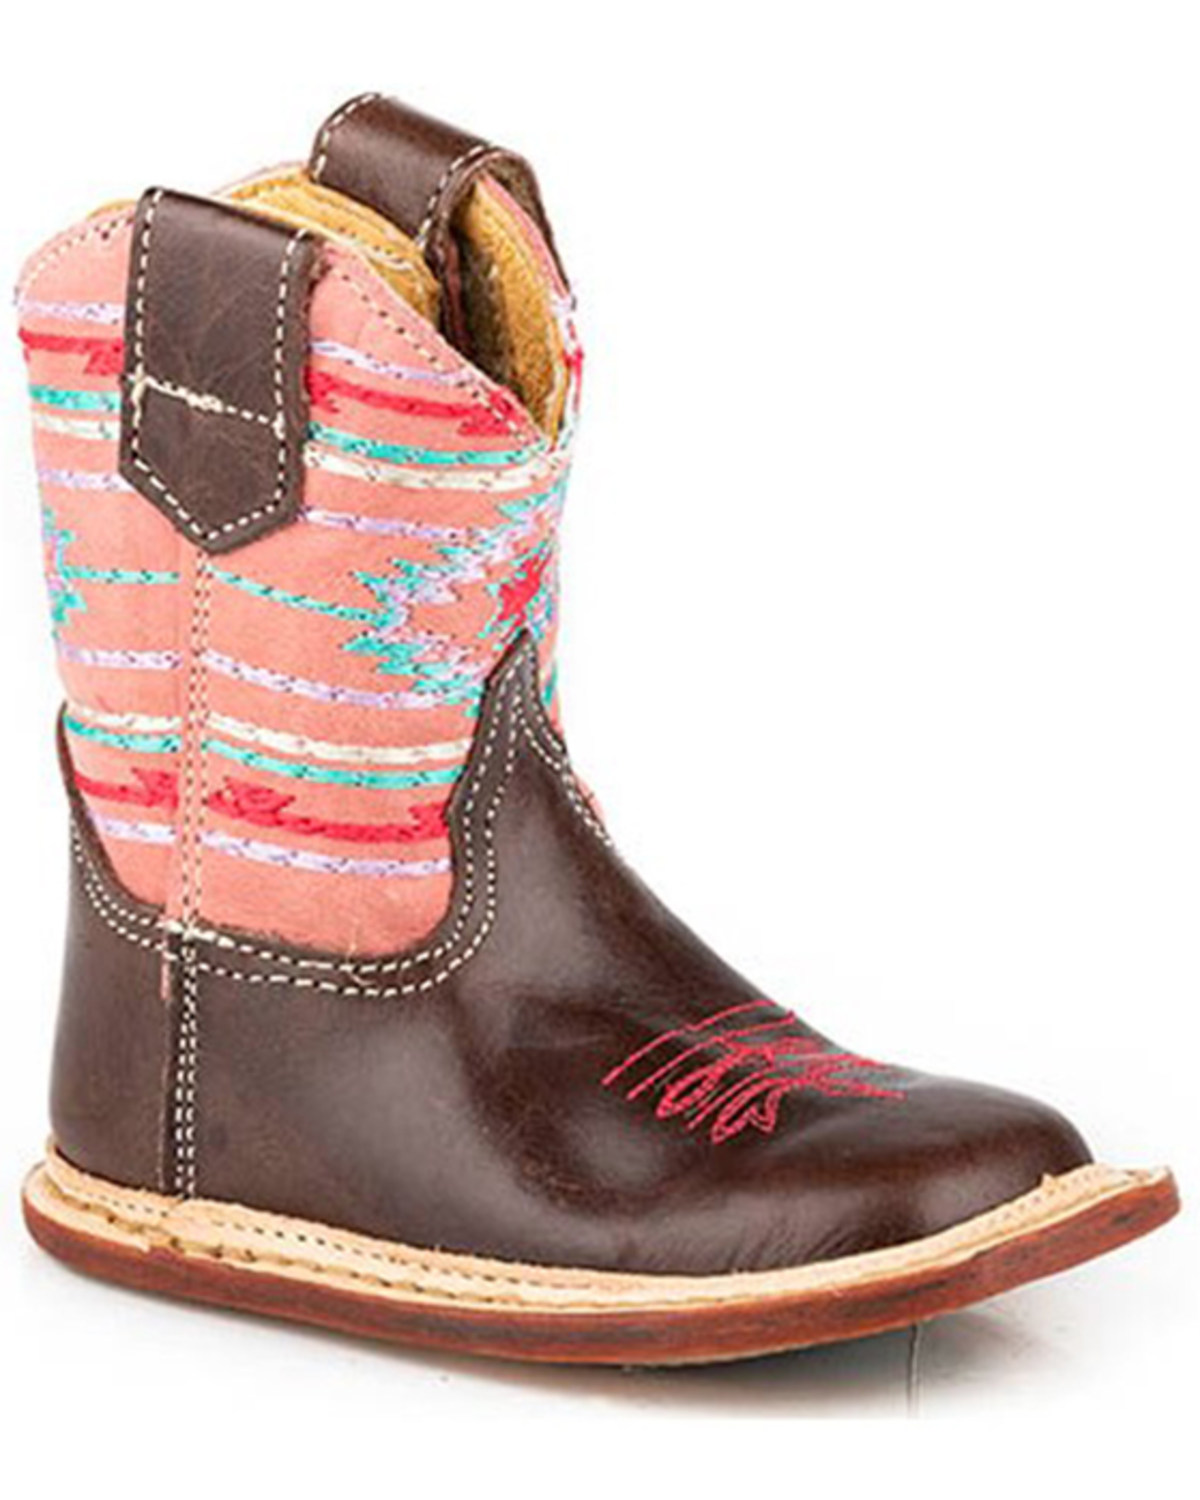 Roper Infant Girls' Shailee Western Boots - Broad Square Toe